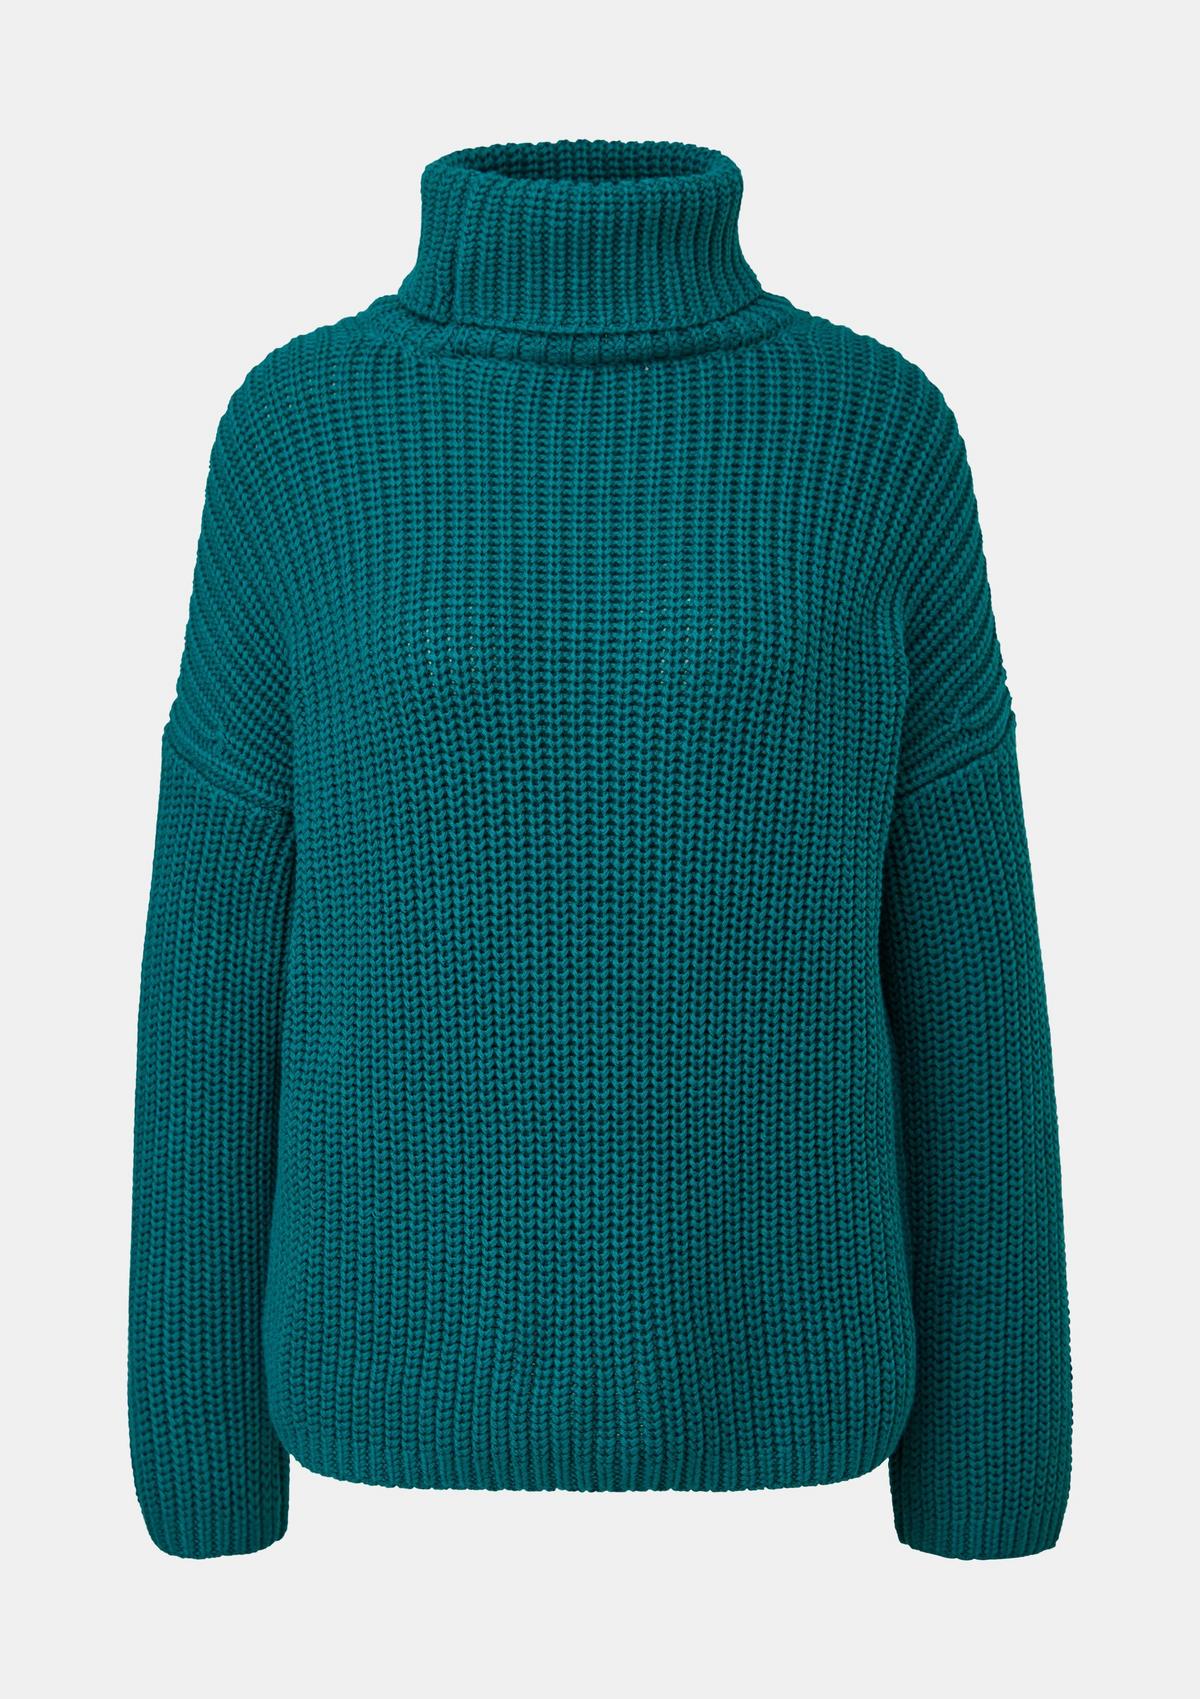 Loose-fitting knitted jumper with a polo neck - petrol | Comma